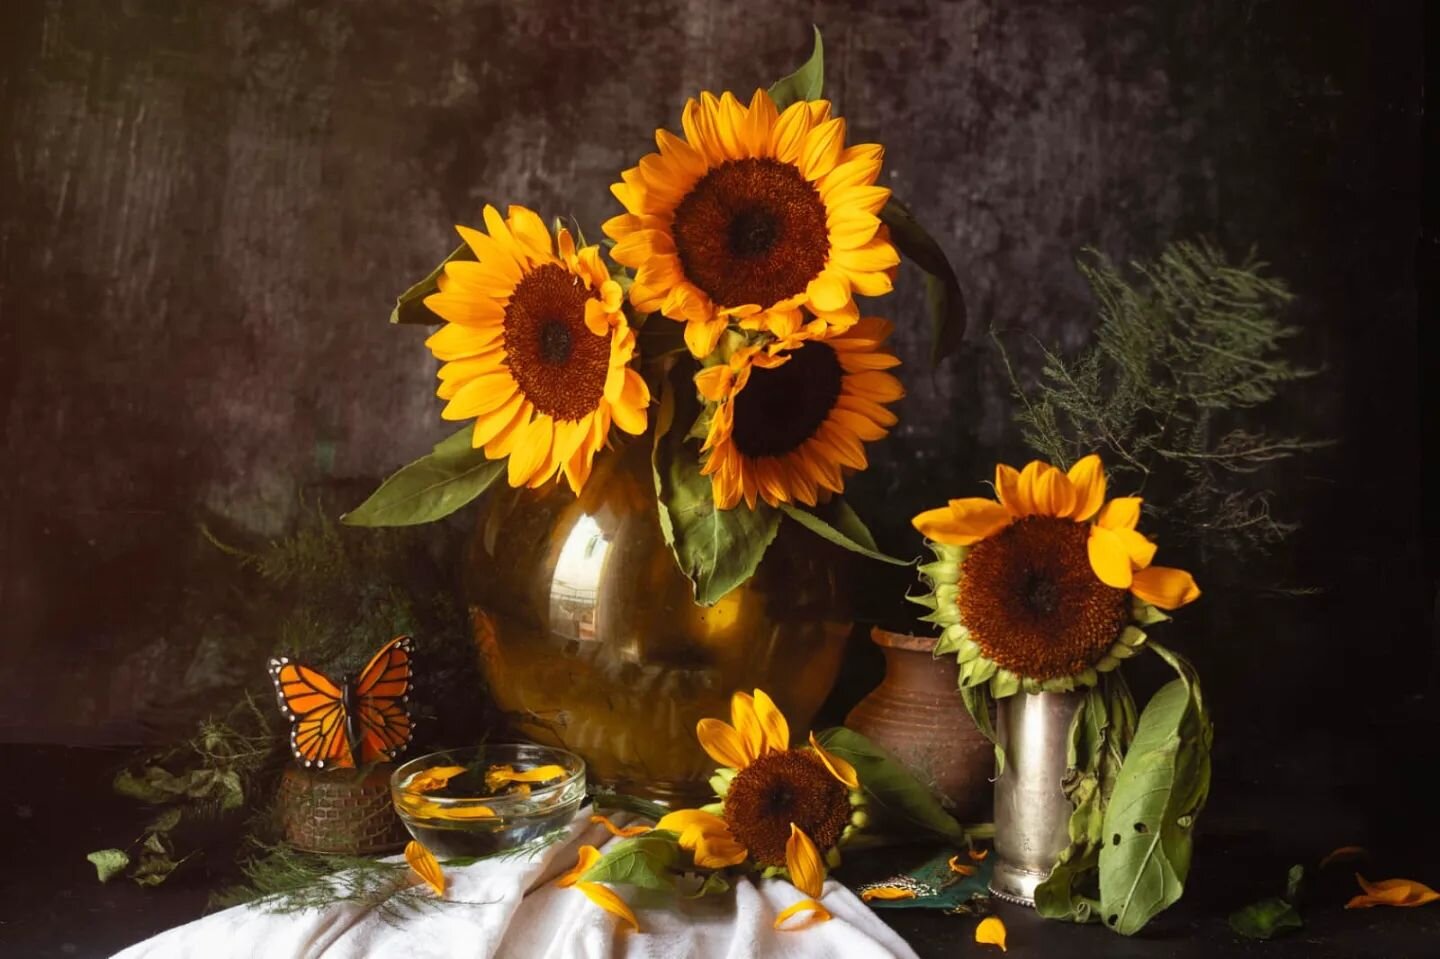 Delightful sunflowers to brighten up your day🌻

#brightenupyourday #sunflowers🌻 #peacefulart #lettinglightin